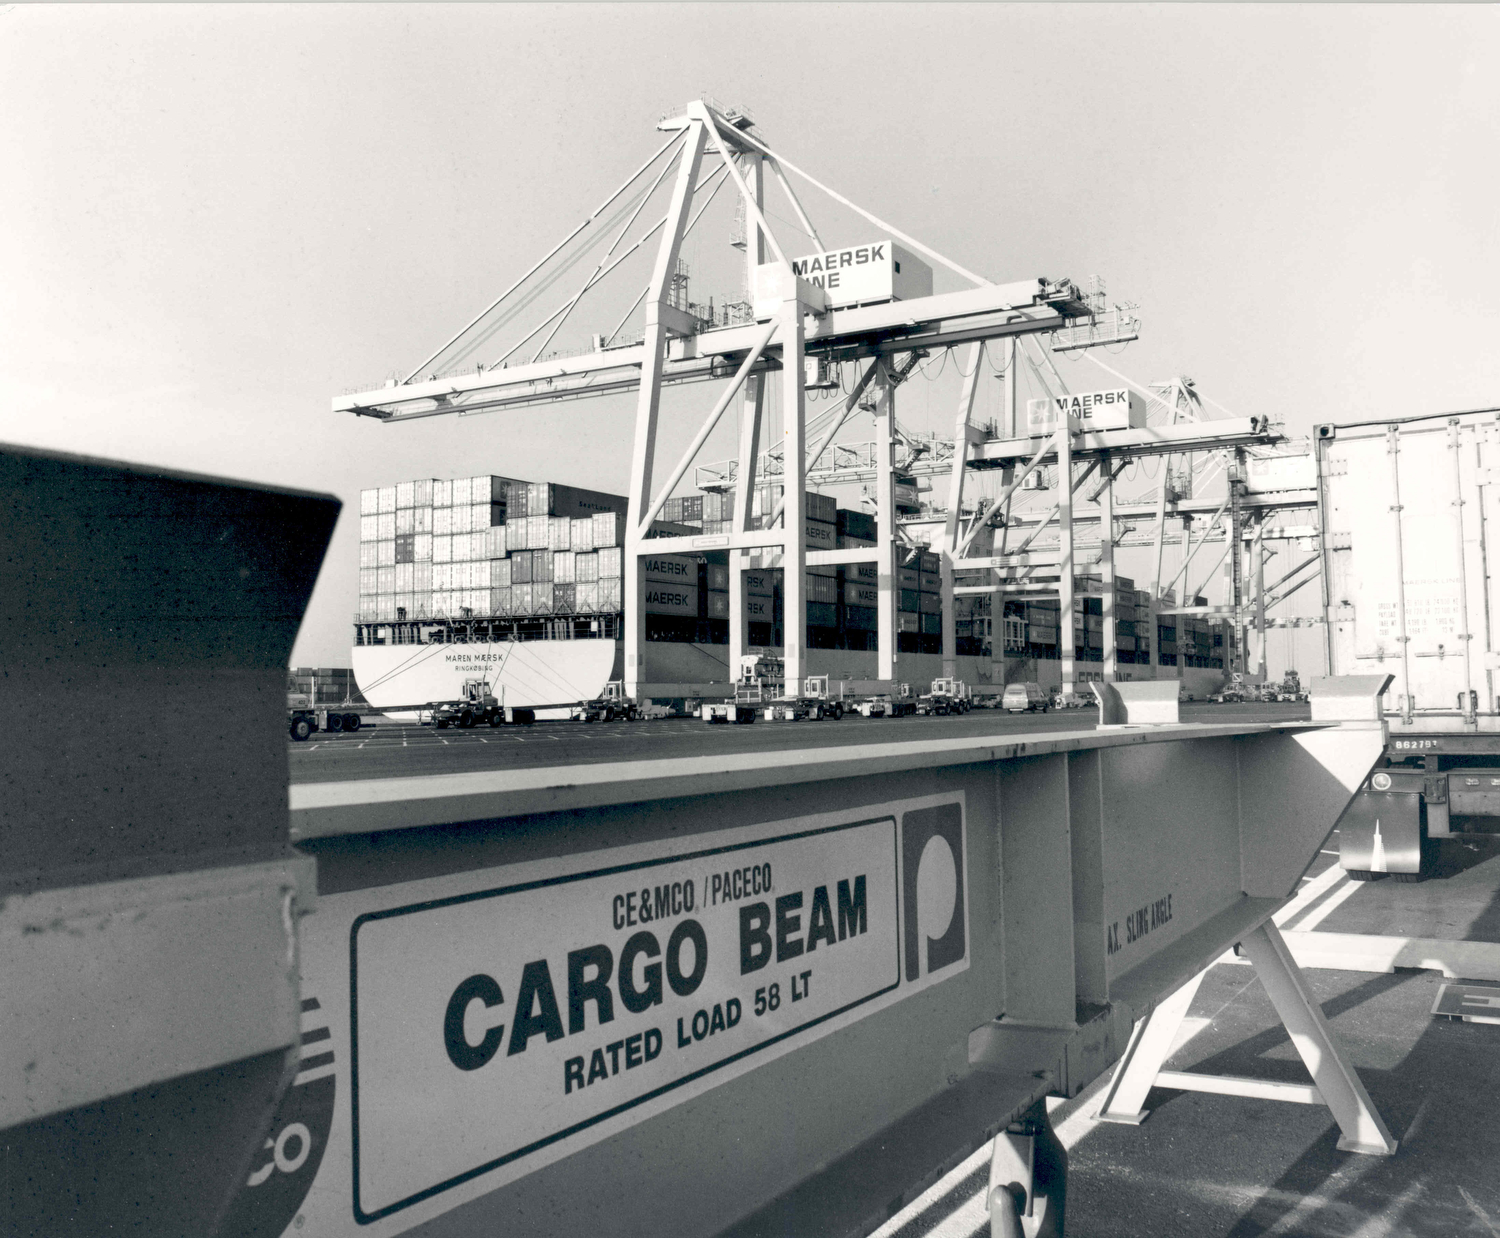 Maersk opens a terminal on the expanded Pier J, 1993.